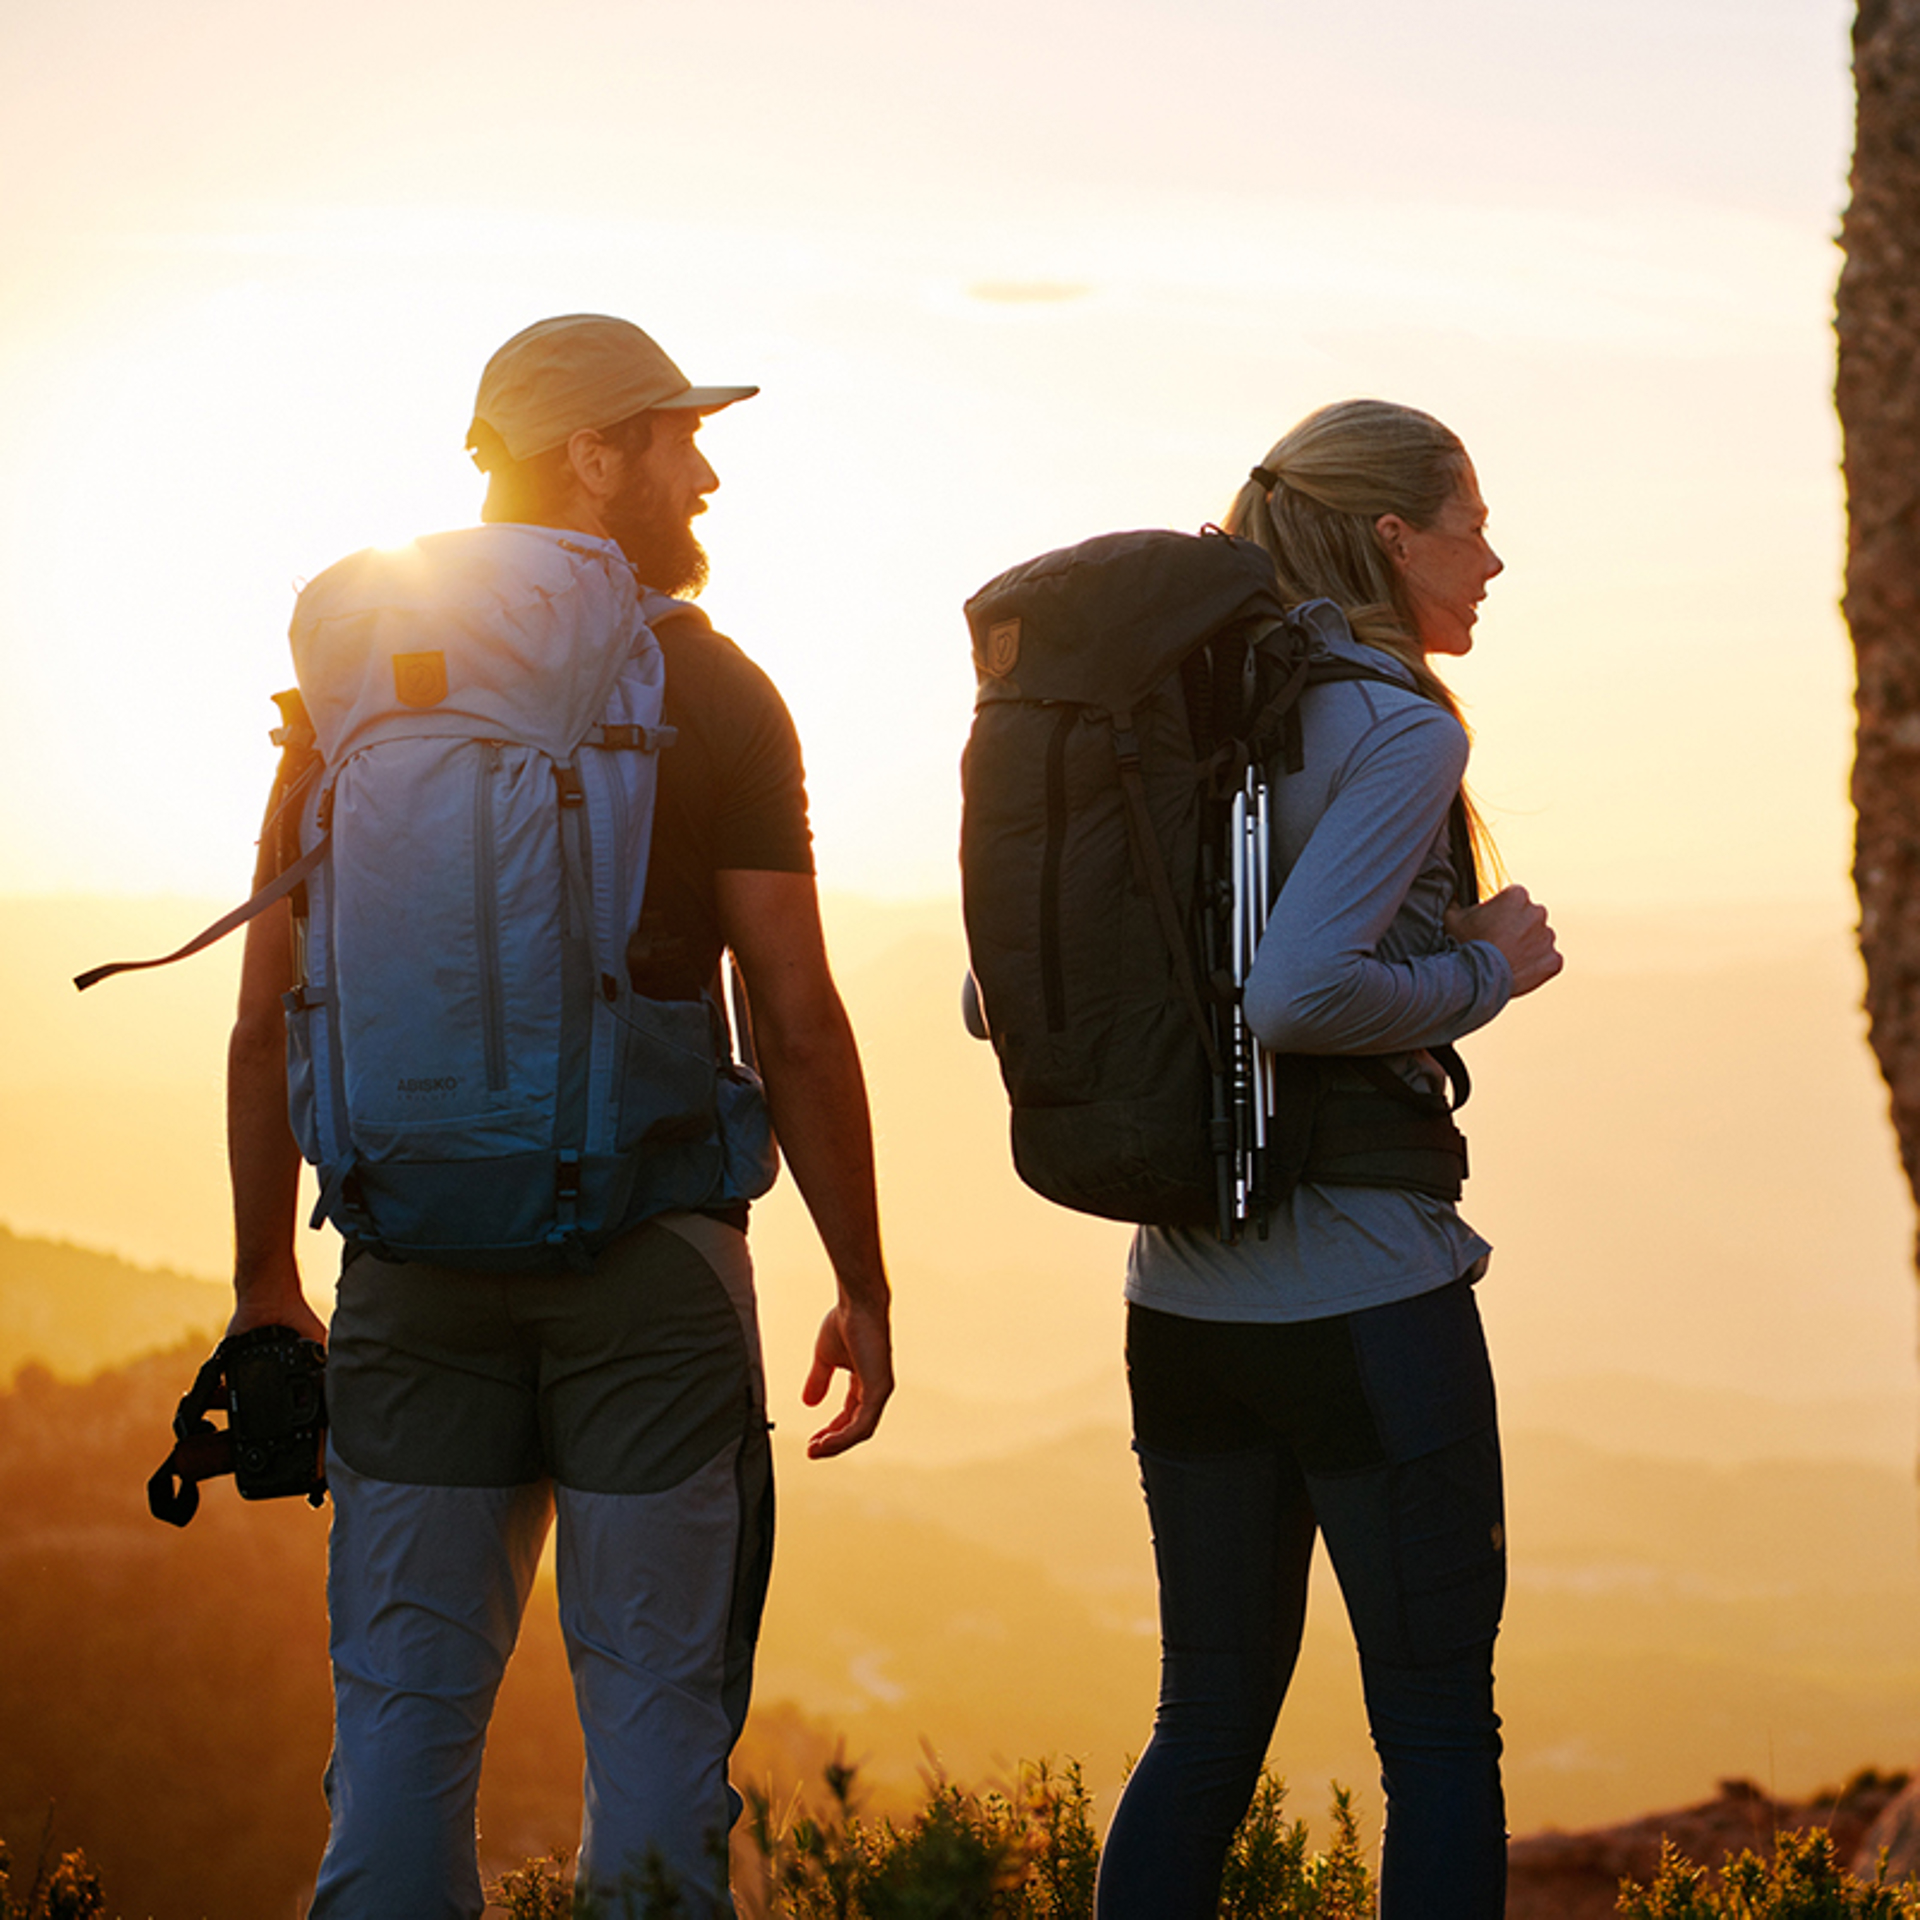 Two people walking with large backpacks towards sunset